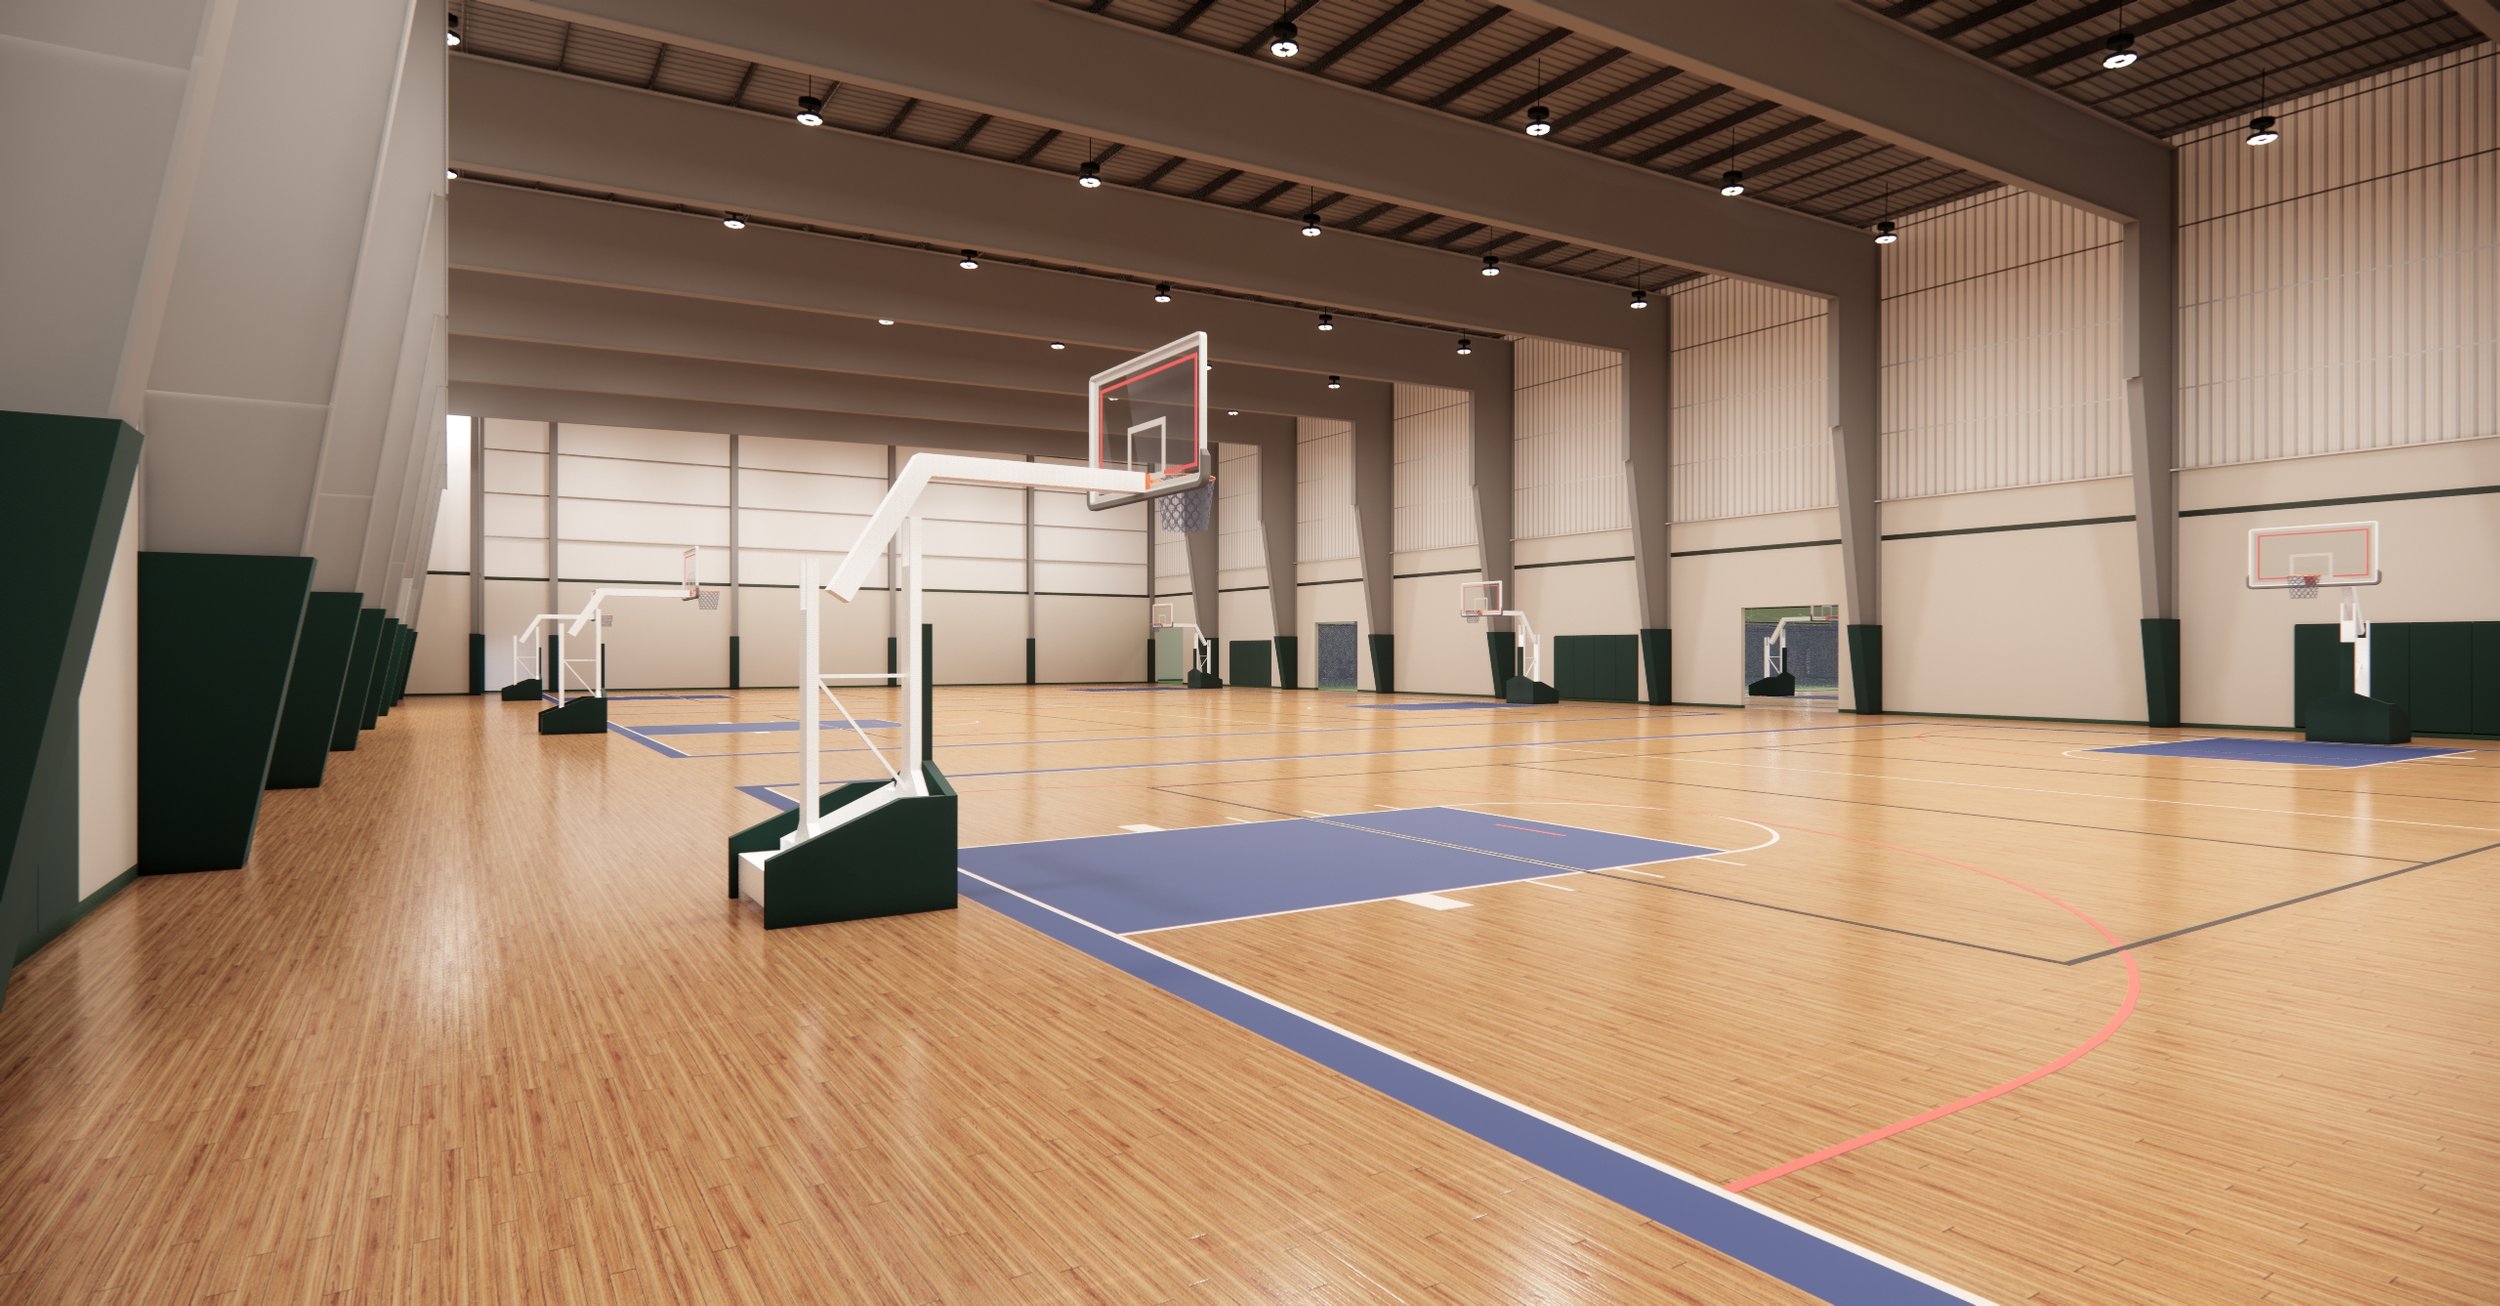 New Addition - Permanent Basketball Courts